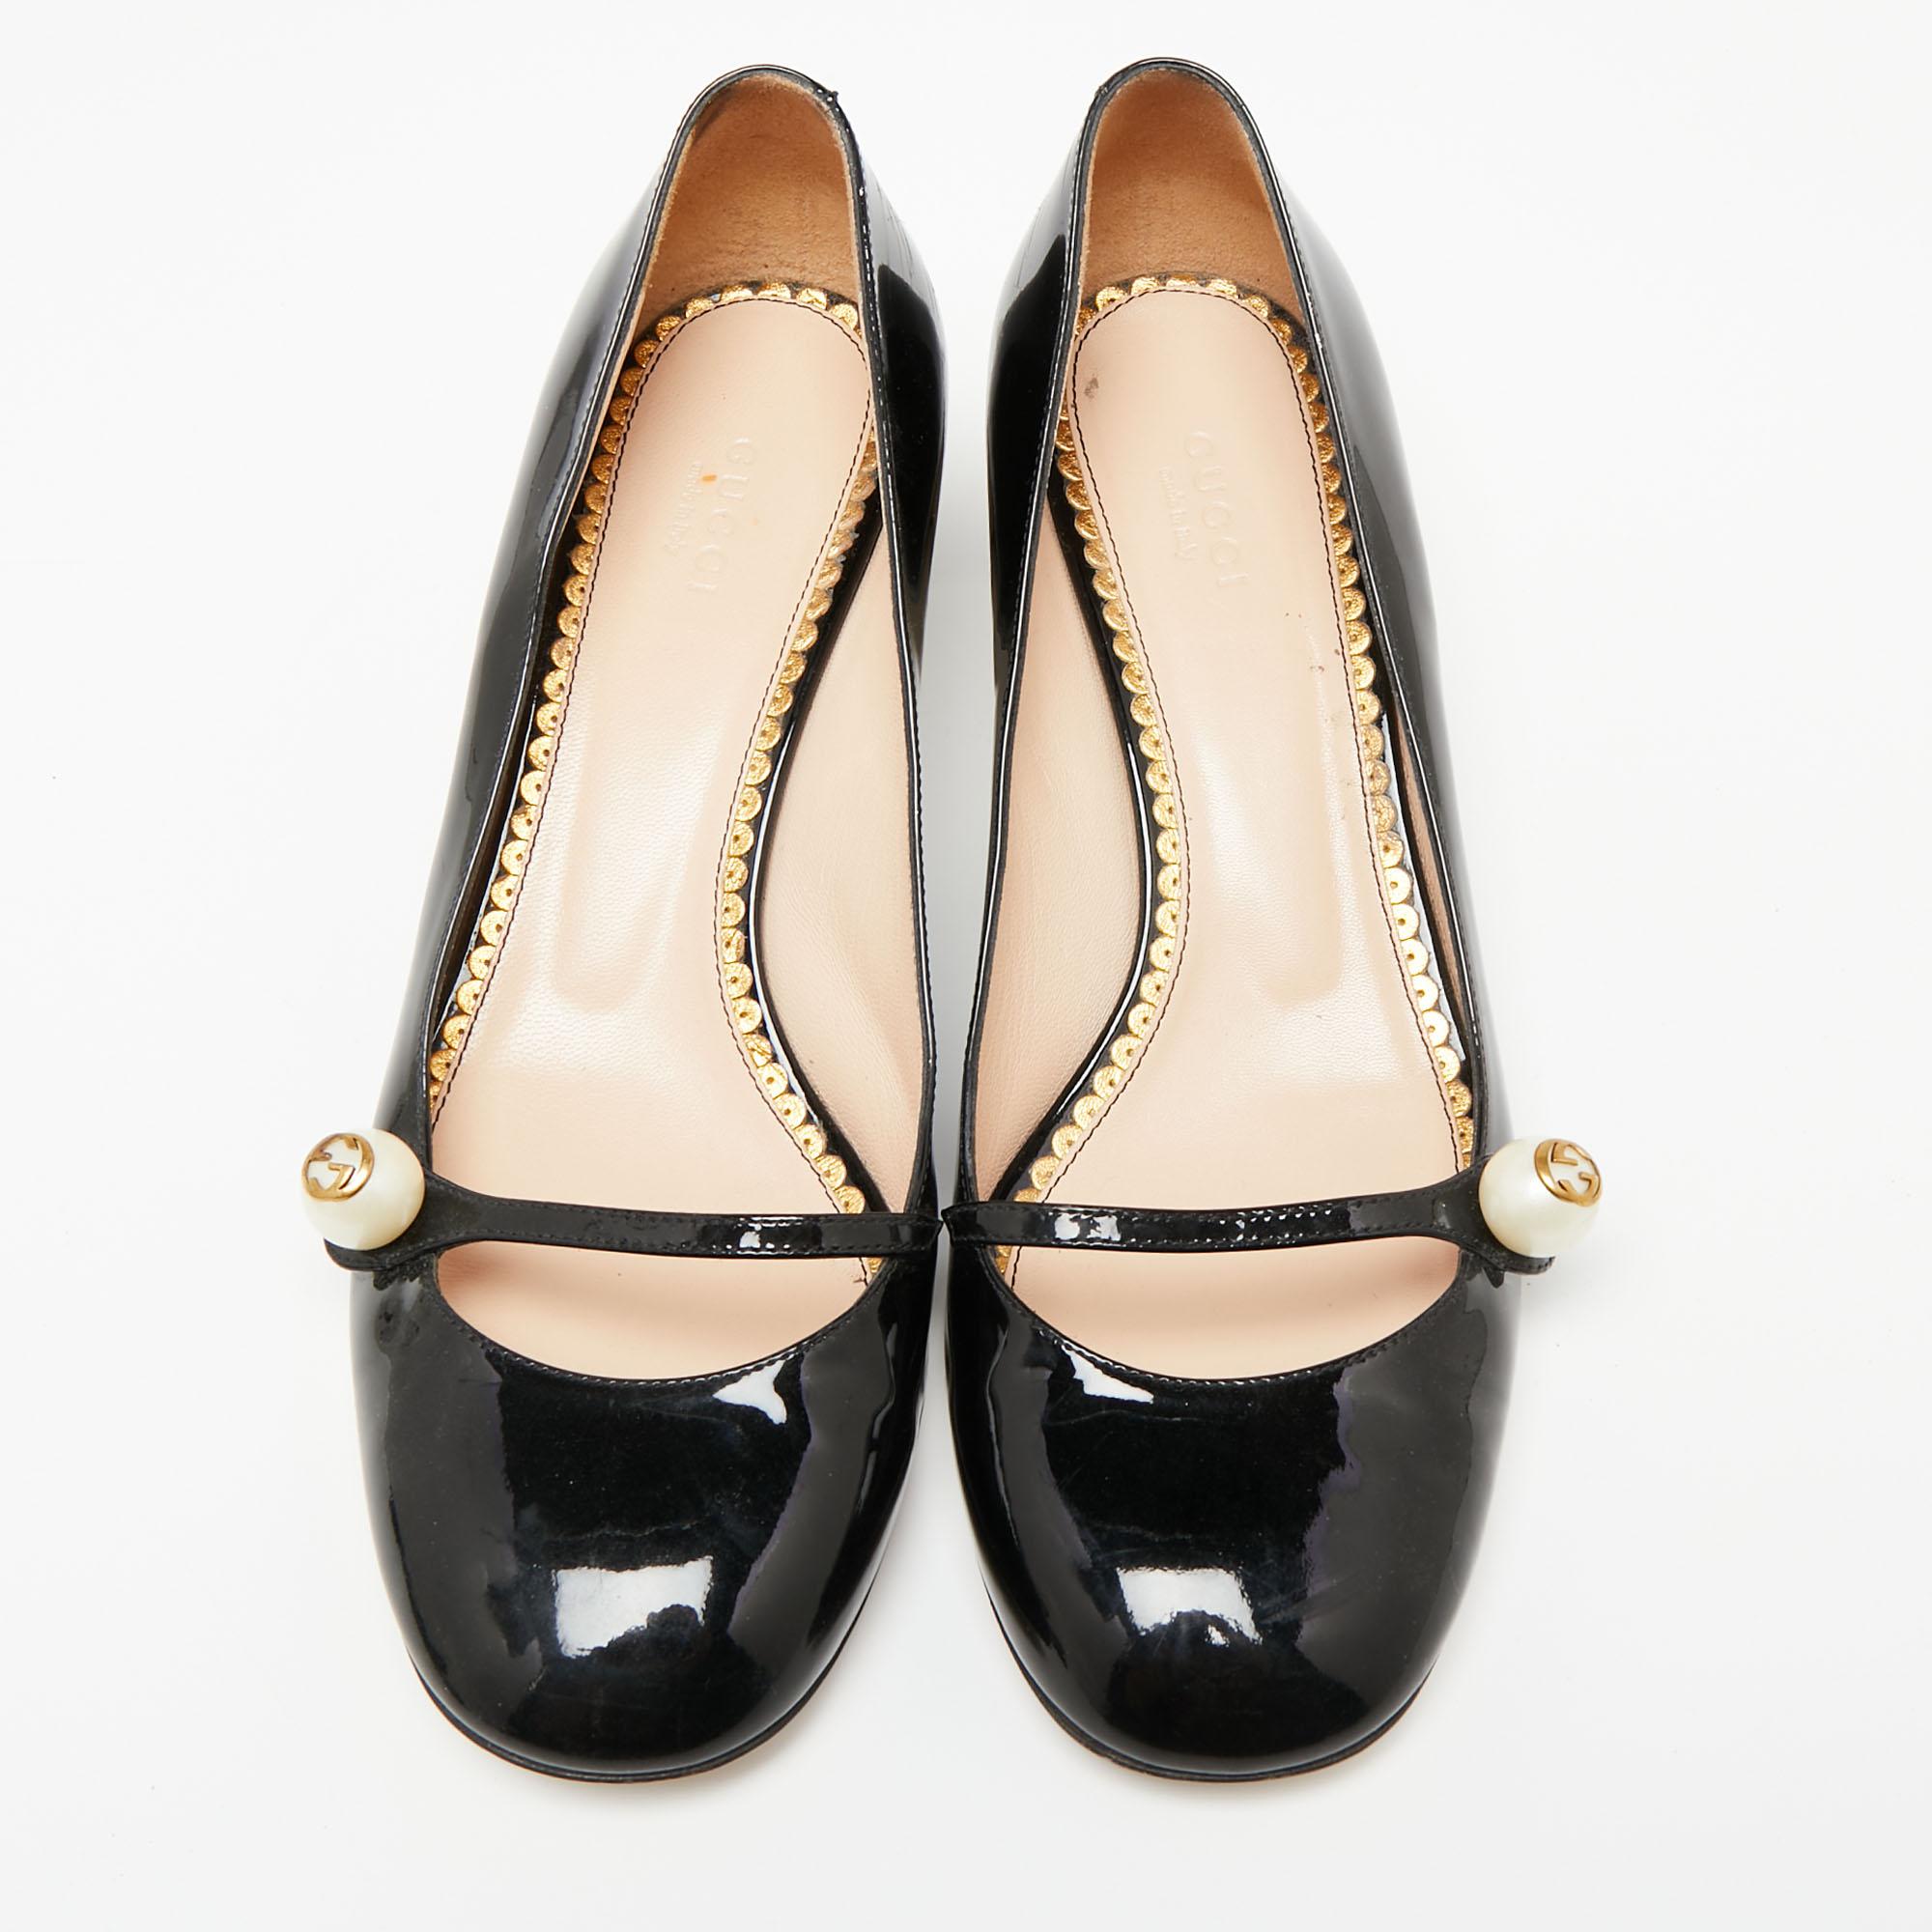 Presented by the House of Gucci, these iconic pumps remain admirable in style and design. They are created using black patent leather on the exterior and showcase pearl embellishments on the upper. They are completed with block heels and will surely